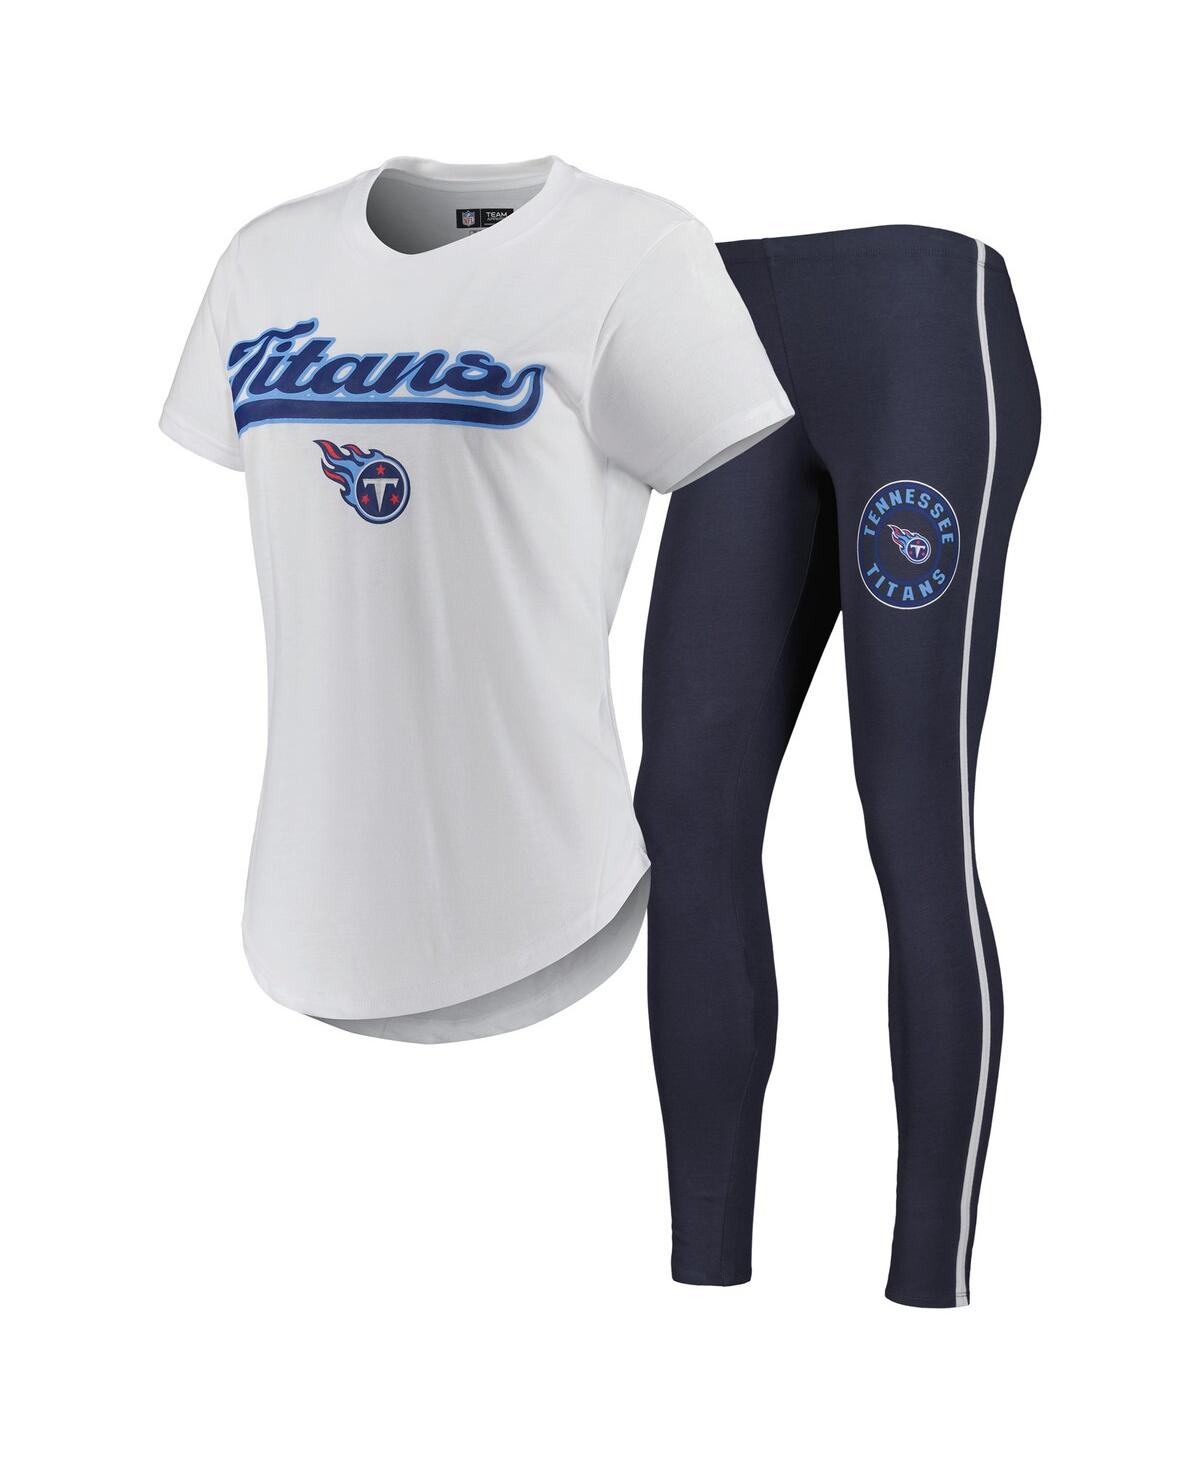 Women's Concepts Sport White, Charcoal Tennessee Titans Sonata T-shirt and Leggings Sleep Set - White, Charcoal